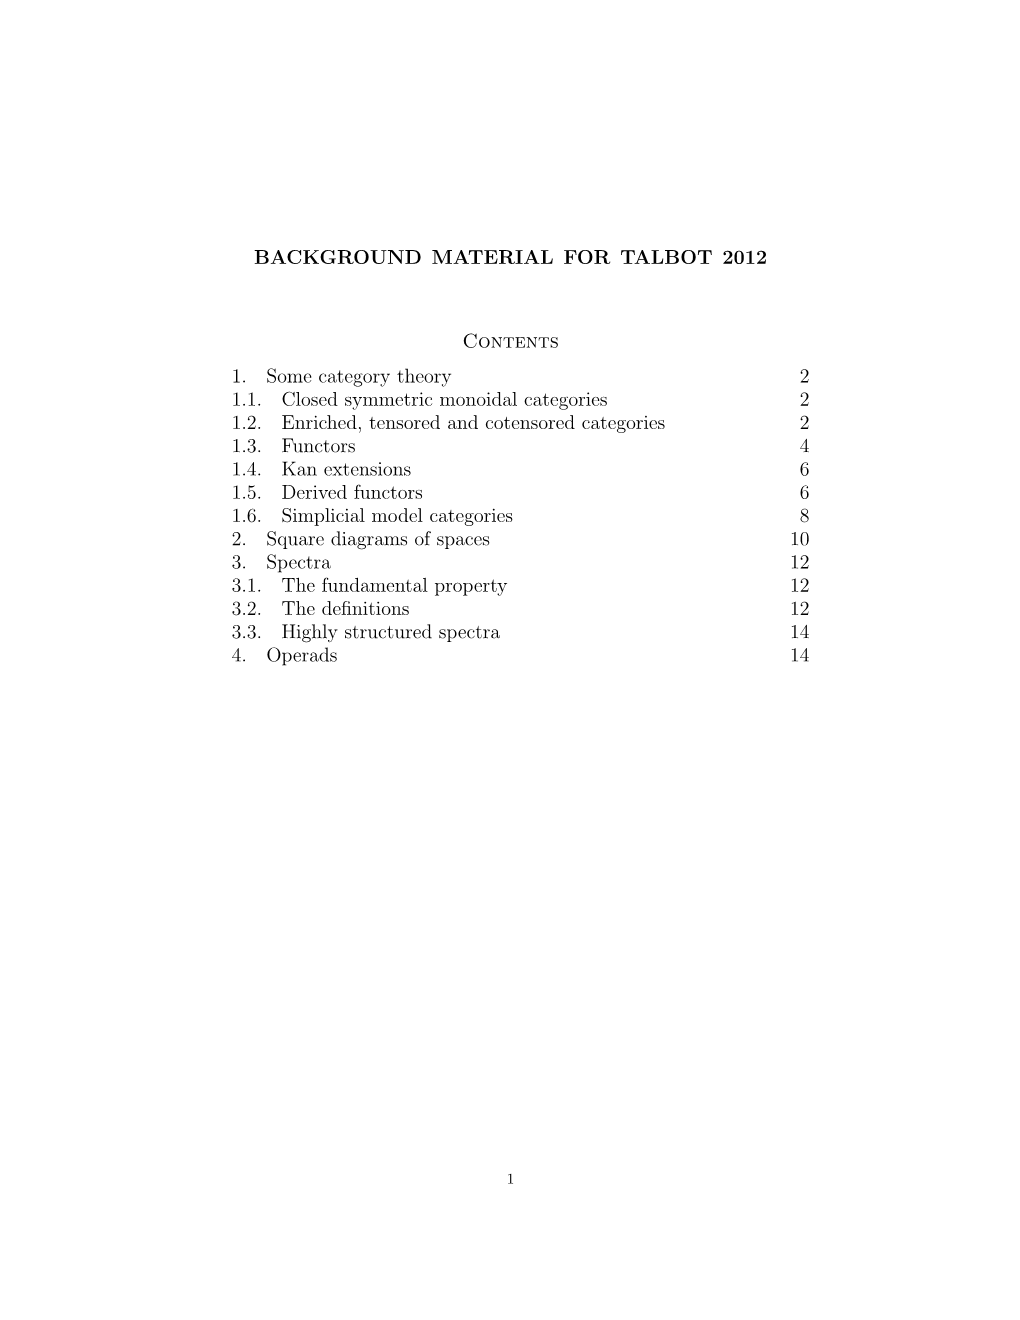 Here Is a PDF of the Preparatory Exercises for the 2012 Talbot